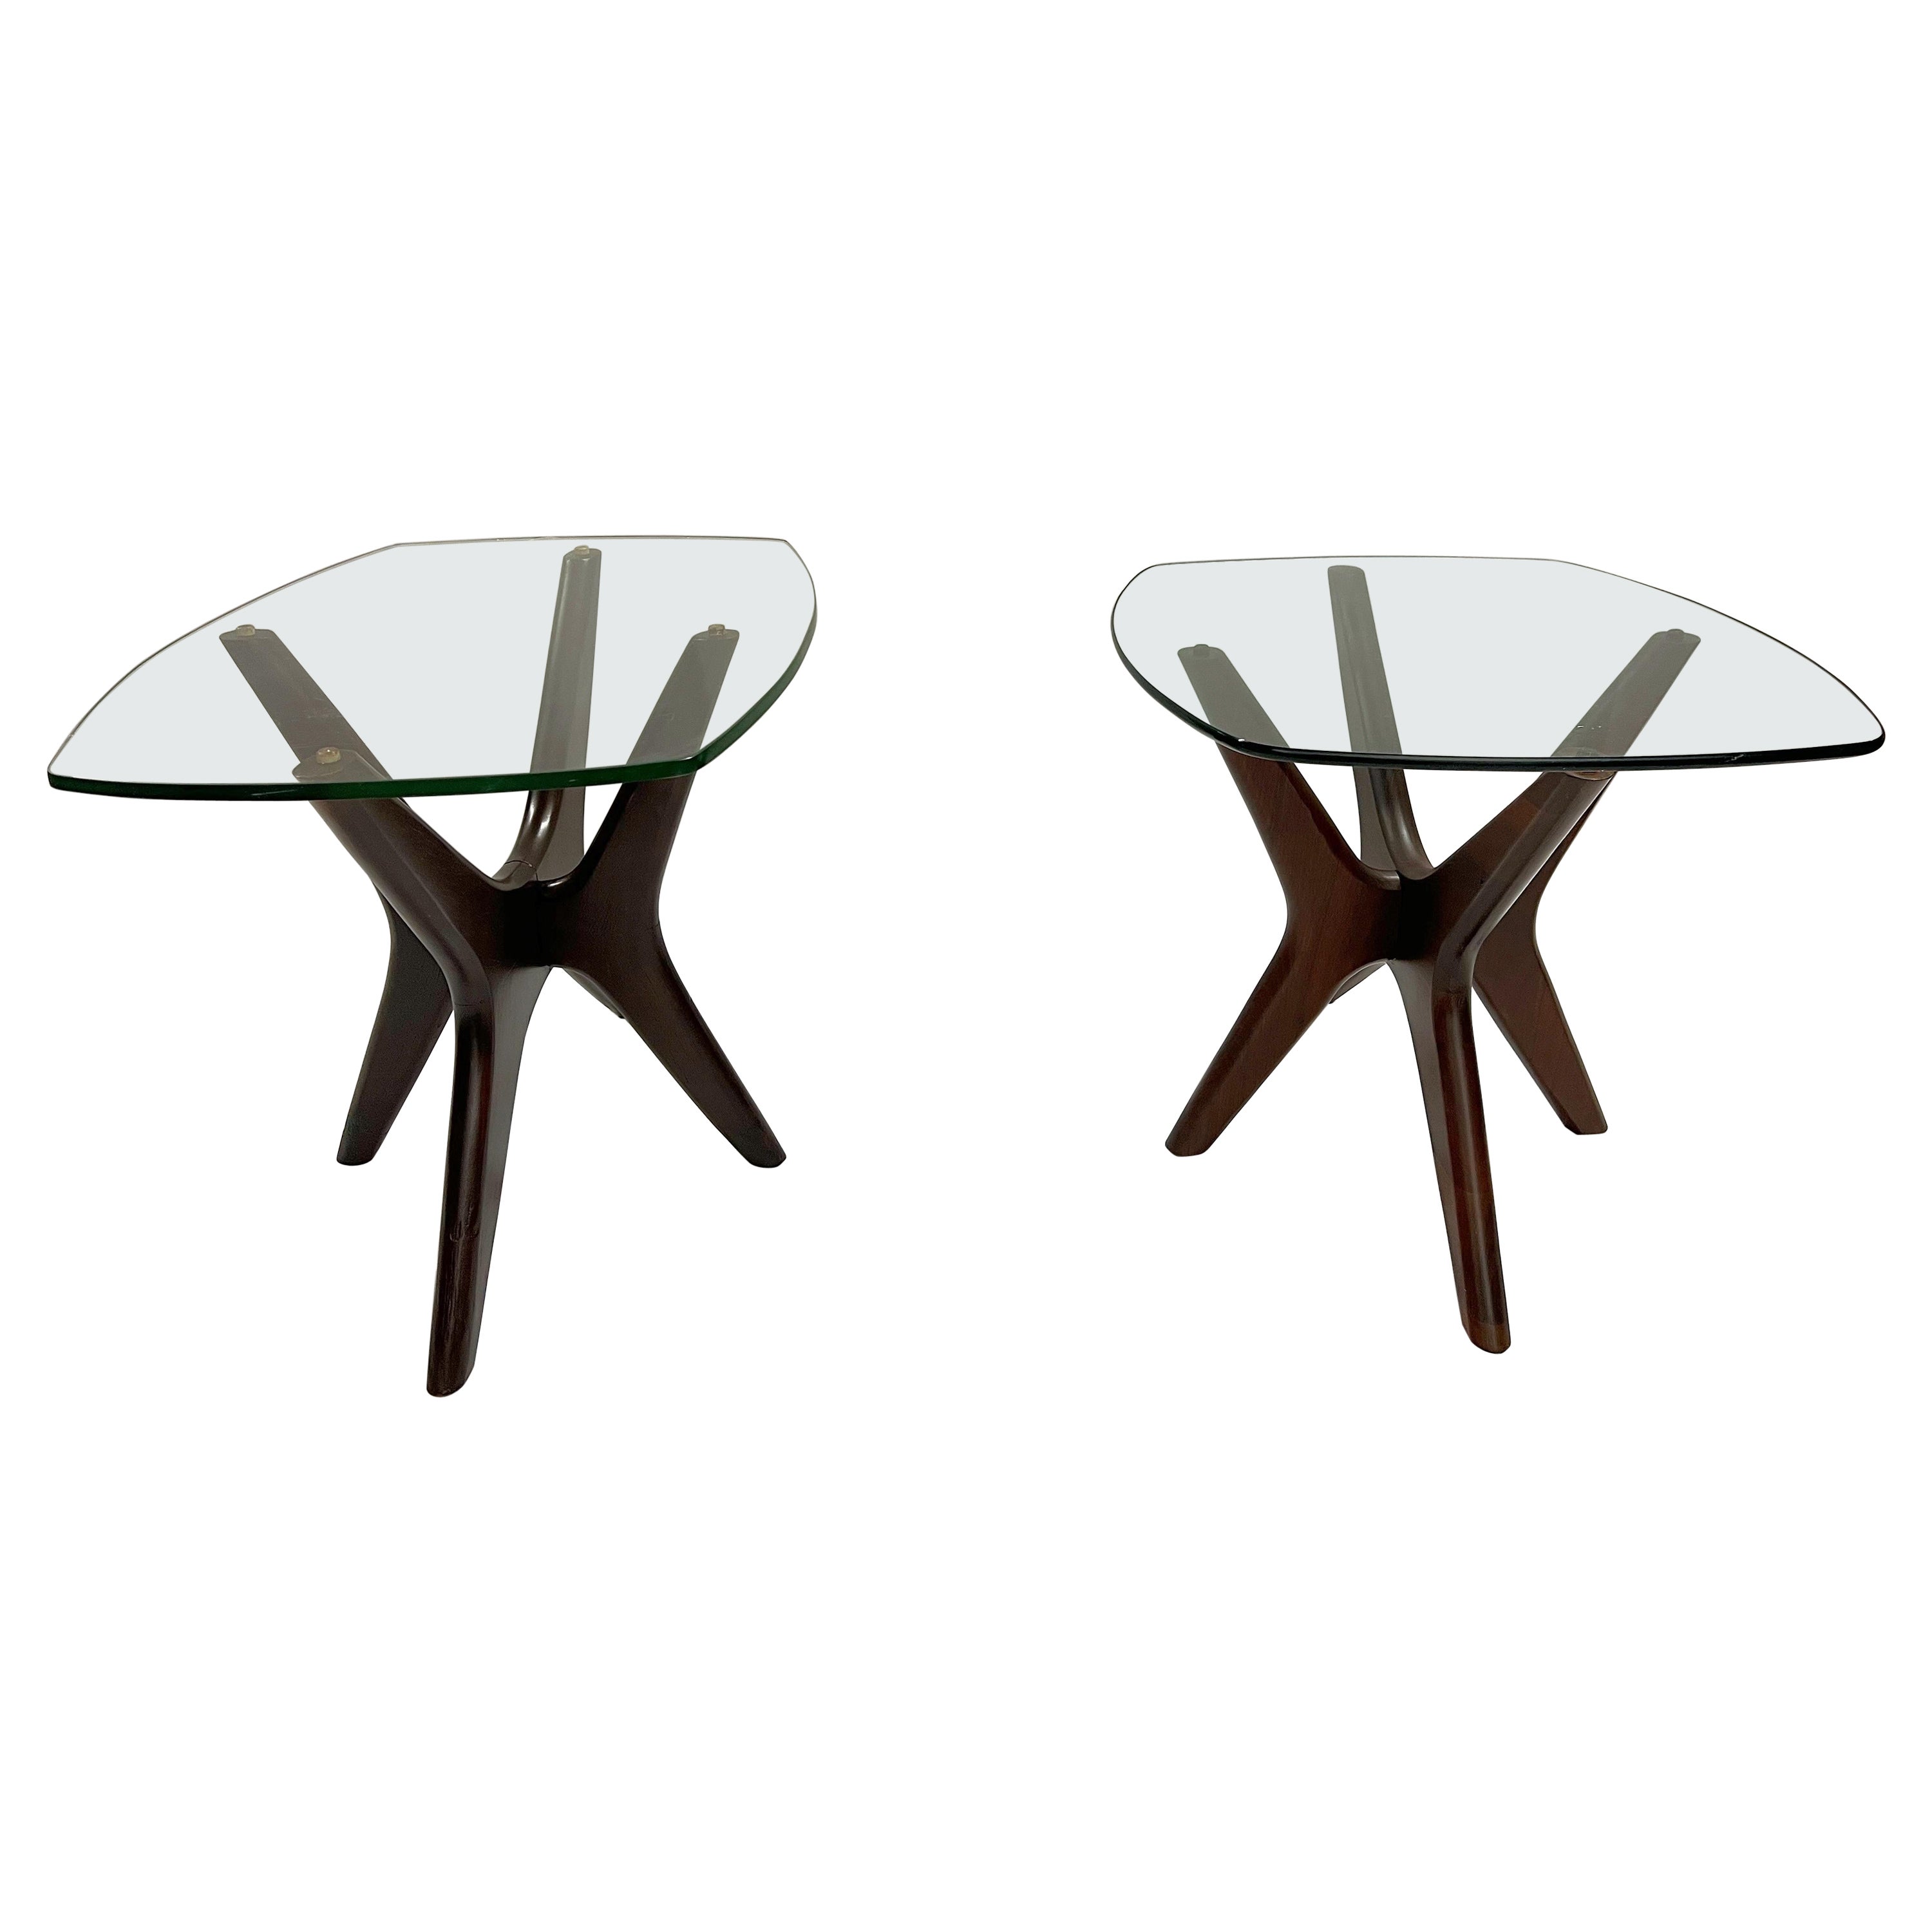 A pair of Adrian Pearsall Mid-Century Modern Style Jax Side Tables For Sale